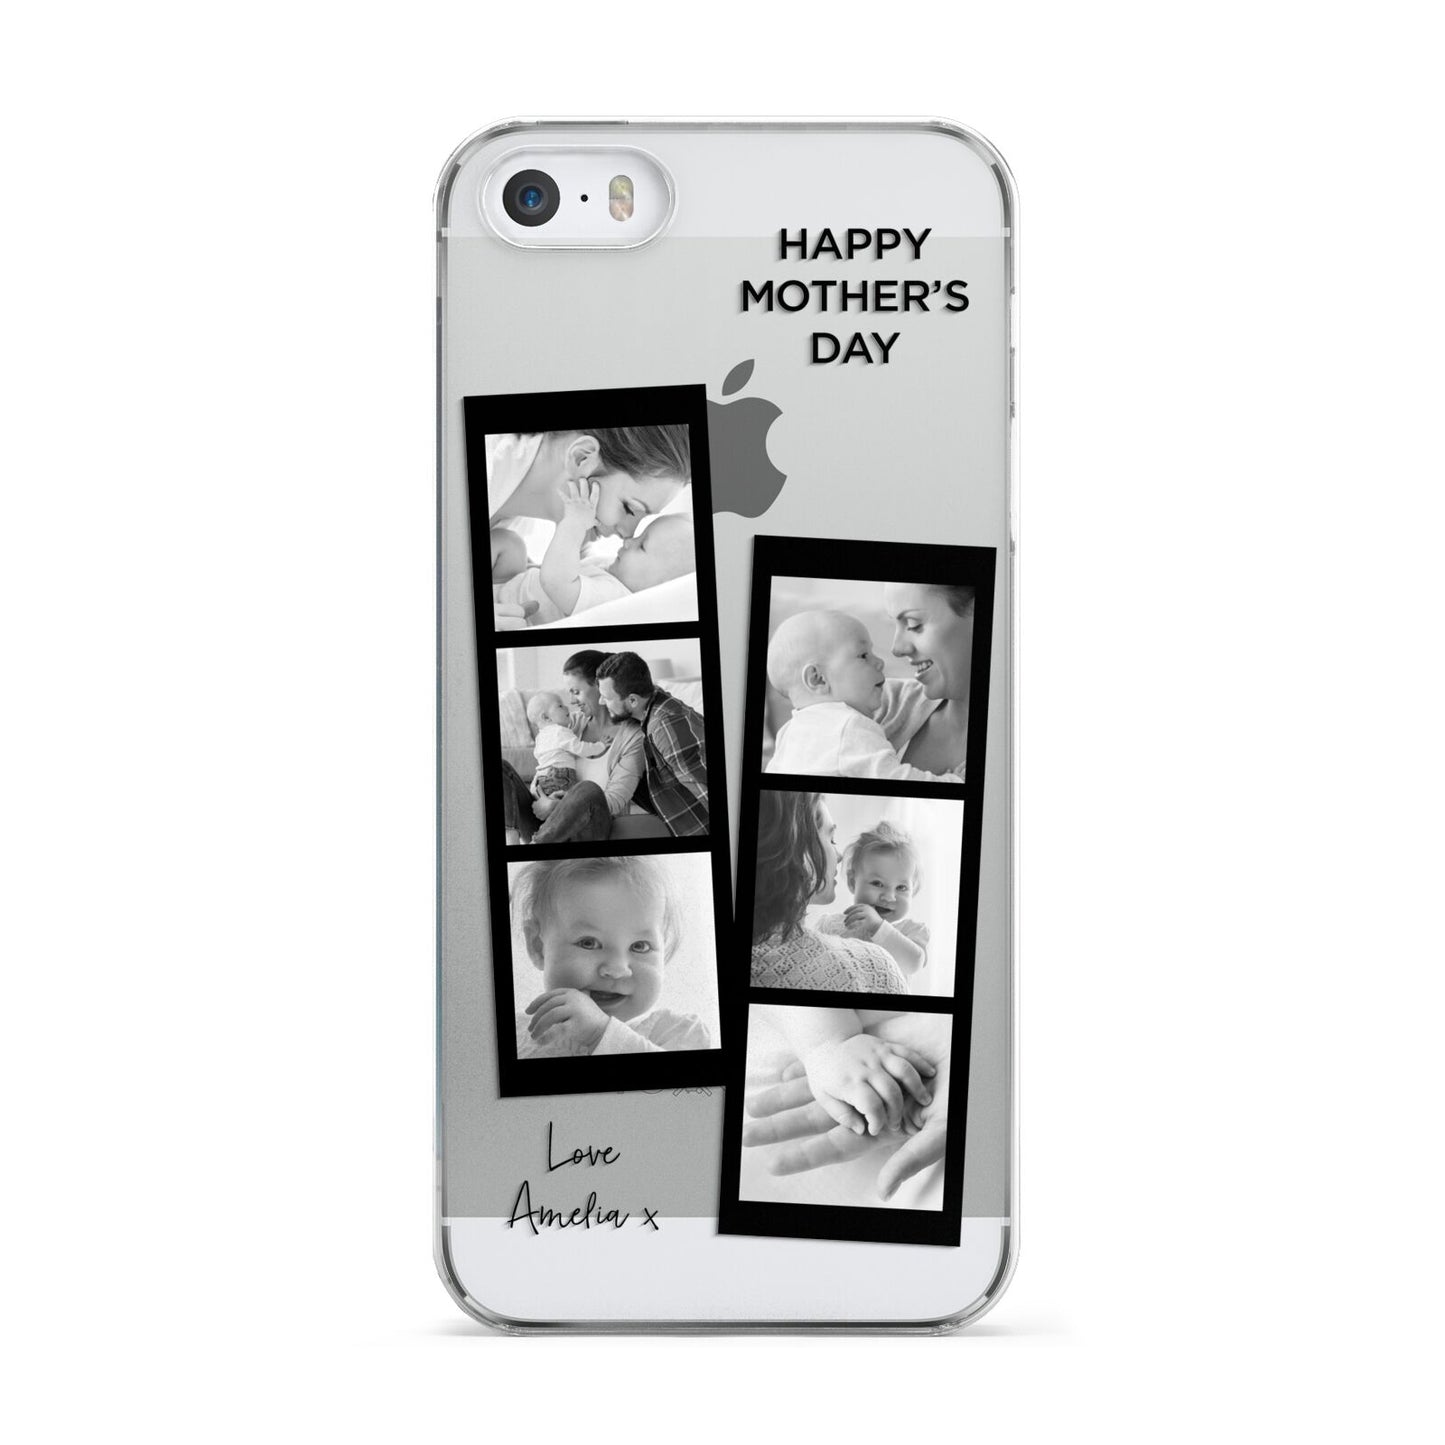 Mothers Day Photo Strip Apple iPhone 5 Case